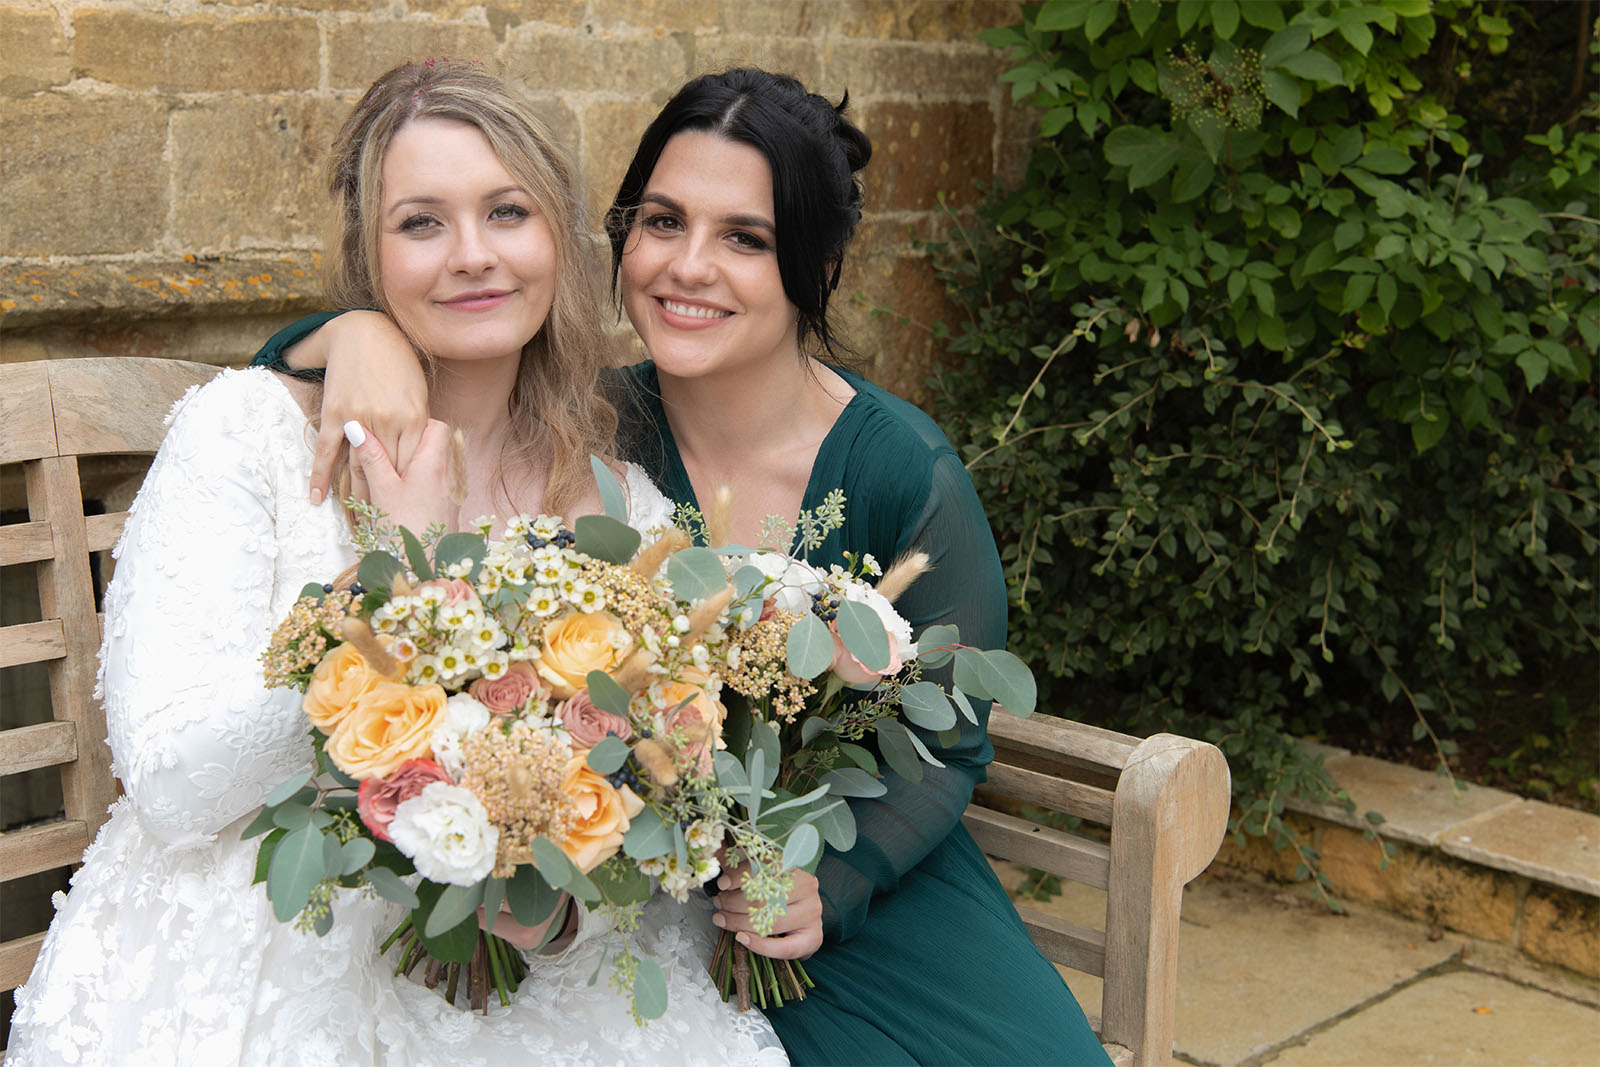 bride relaxing with her bridesmaid and wedding flowers